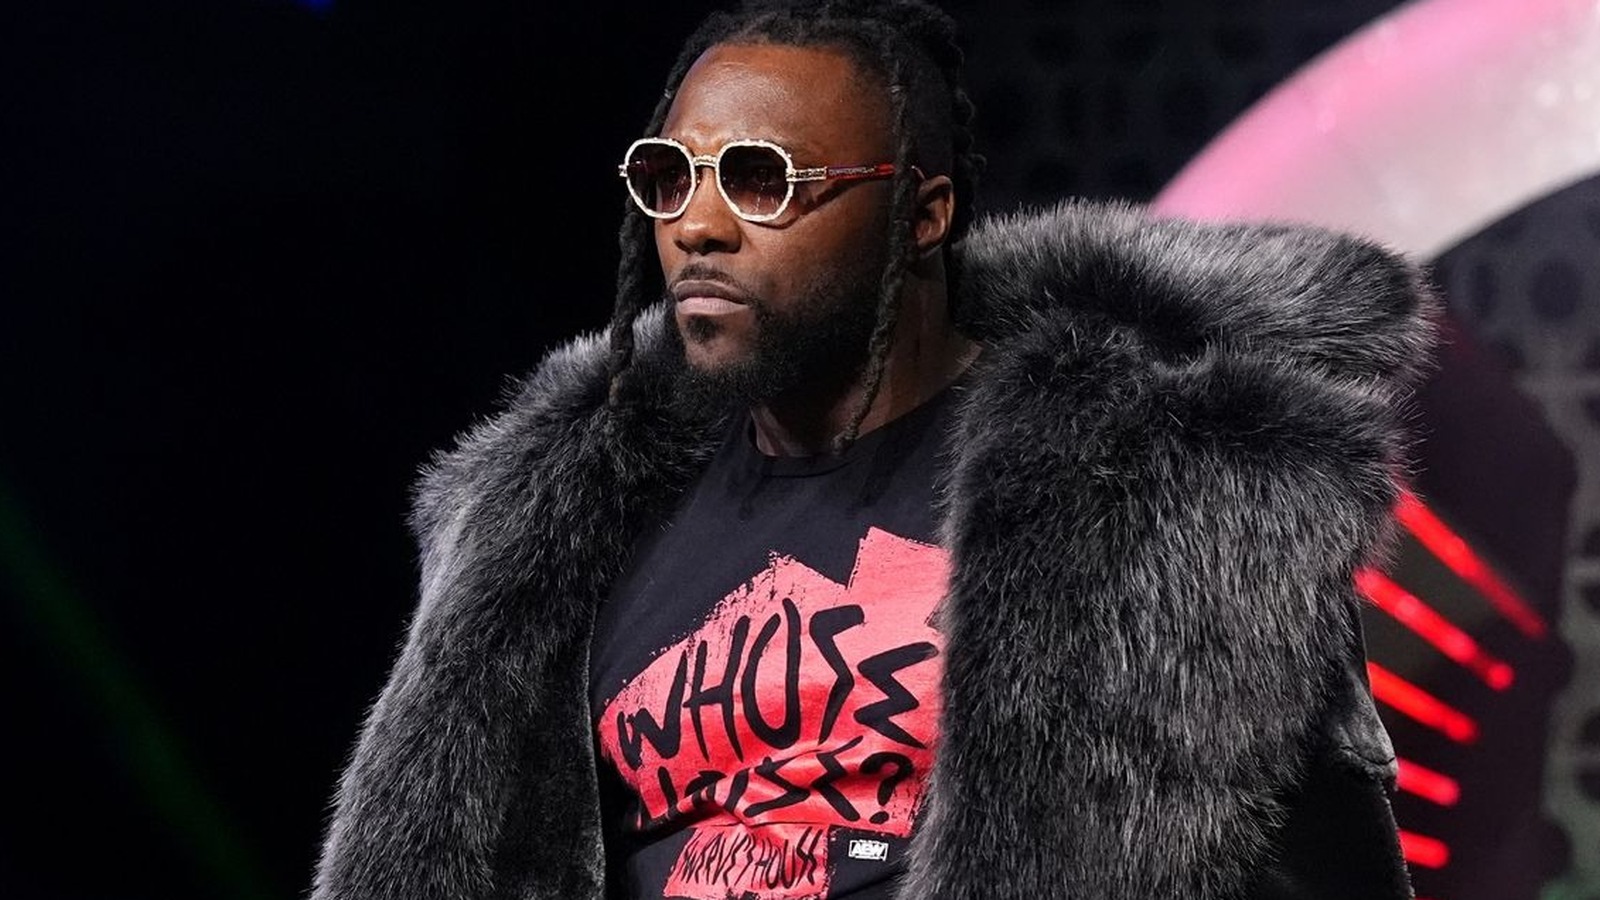 AEW Champ Swerve Strickland Discusses Painting With 'Blank Canvas,' Christian Cage